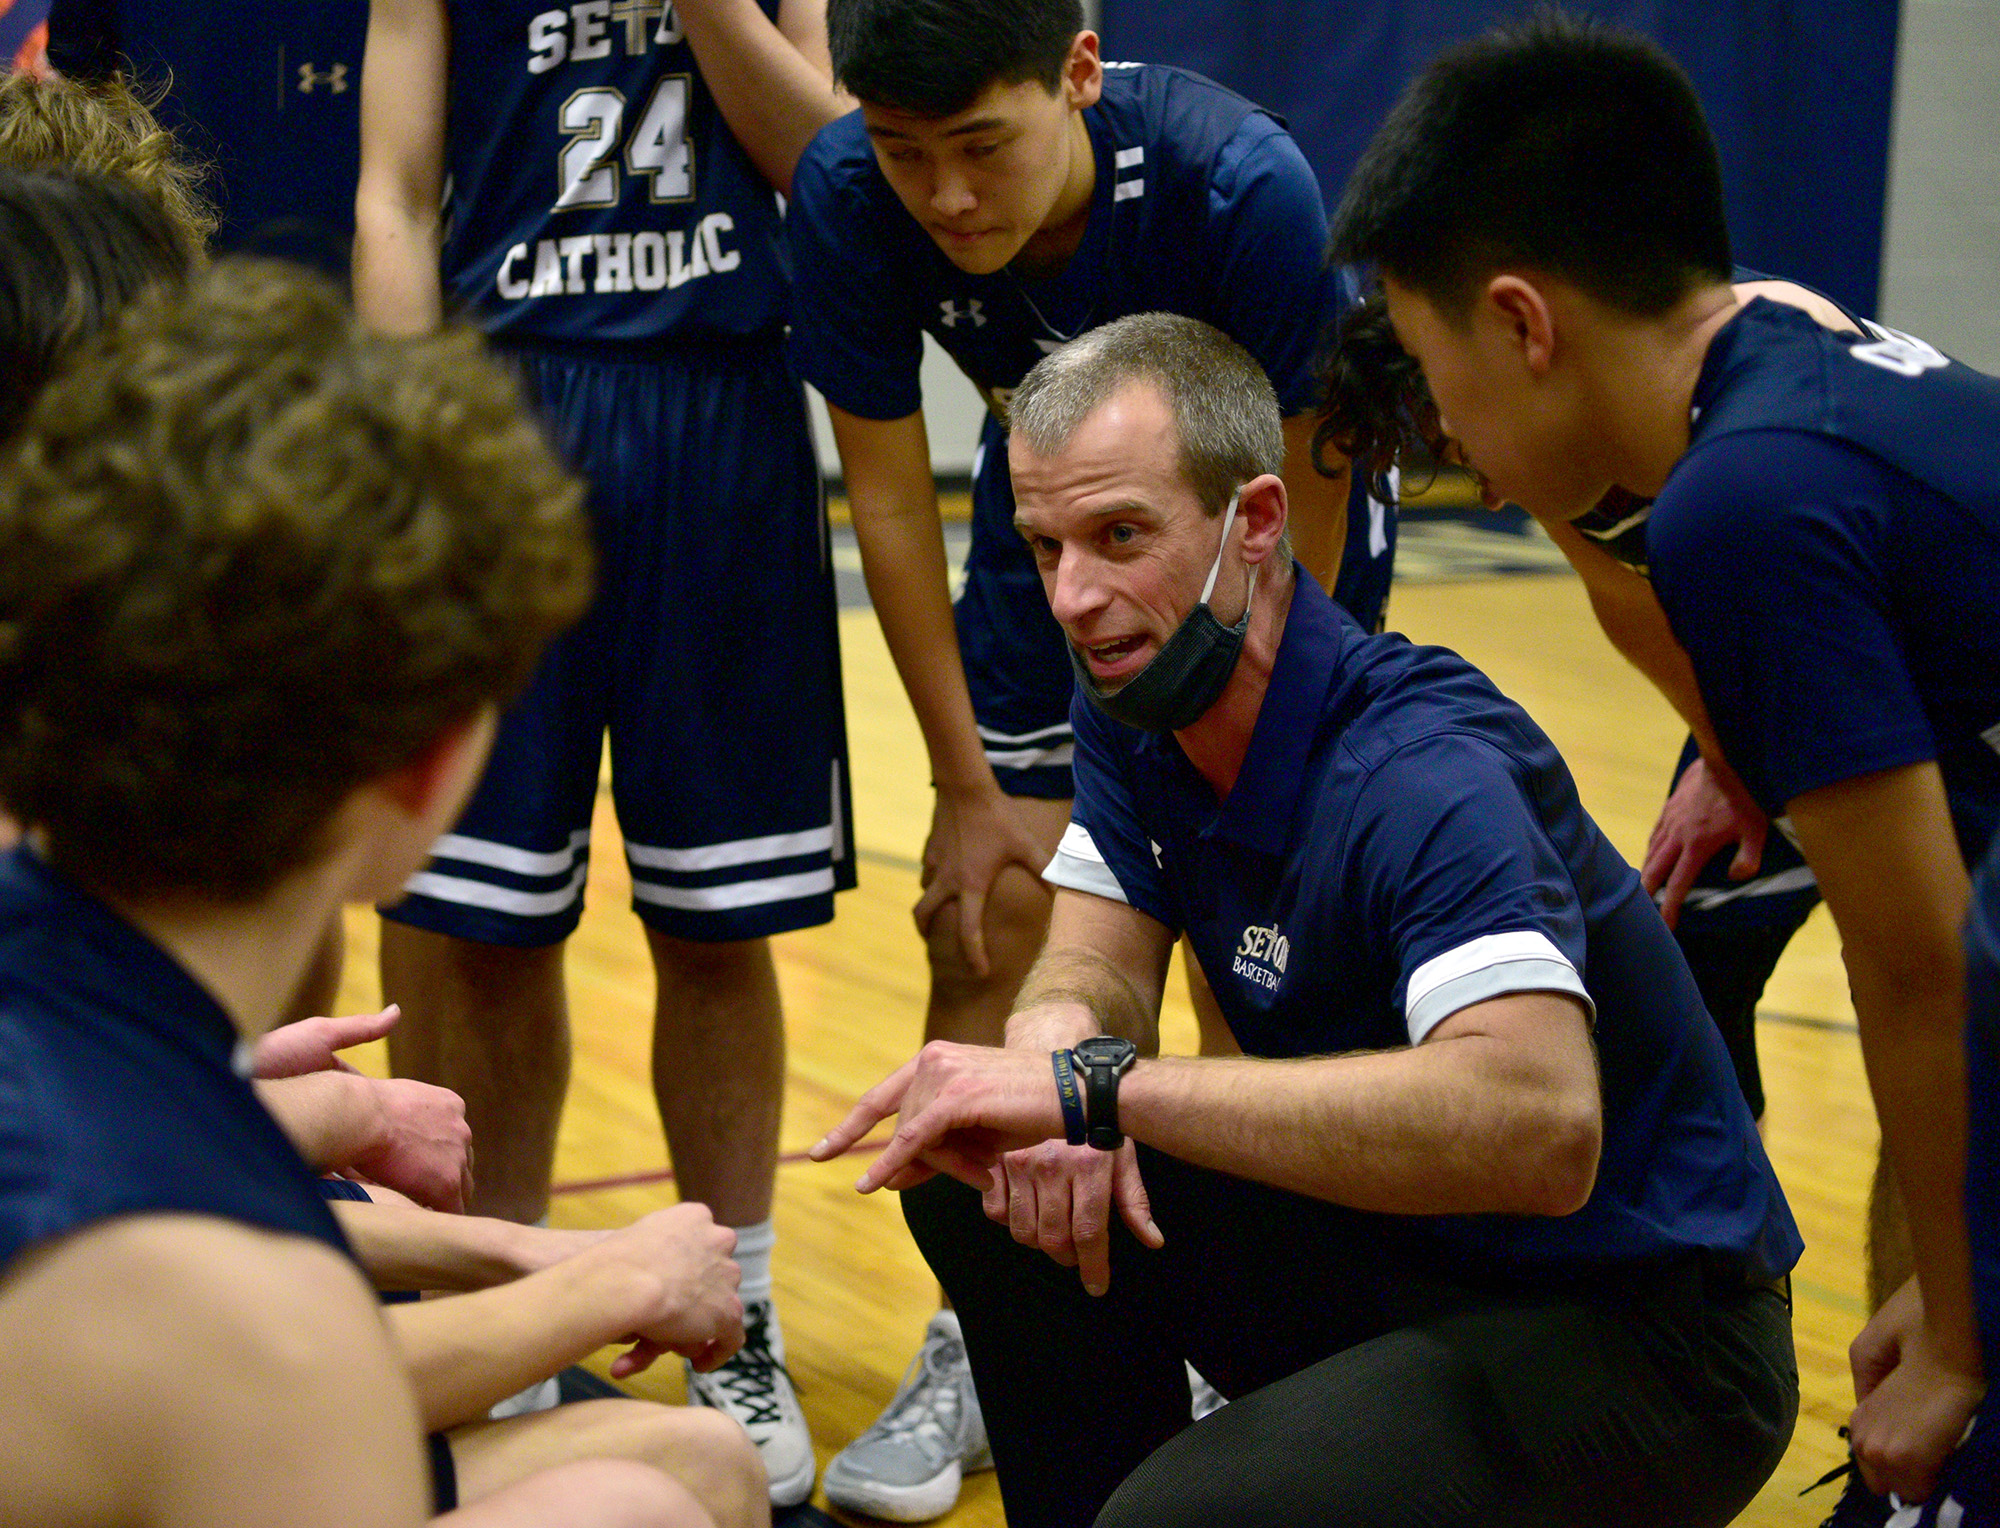 Seton Catholic boys basketball coach Aaron Jenniges talks to the team between quarters Tuesday, Feb. 1, 2022, during the Cougars’ 32-23 loss to the Knights at King’s Way Christian High School.